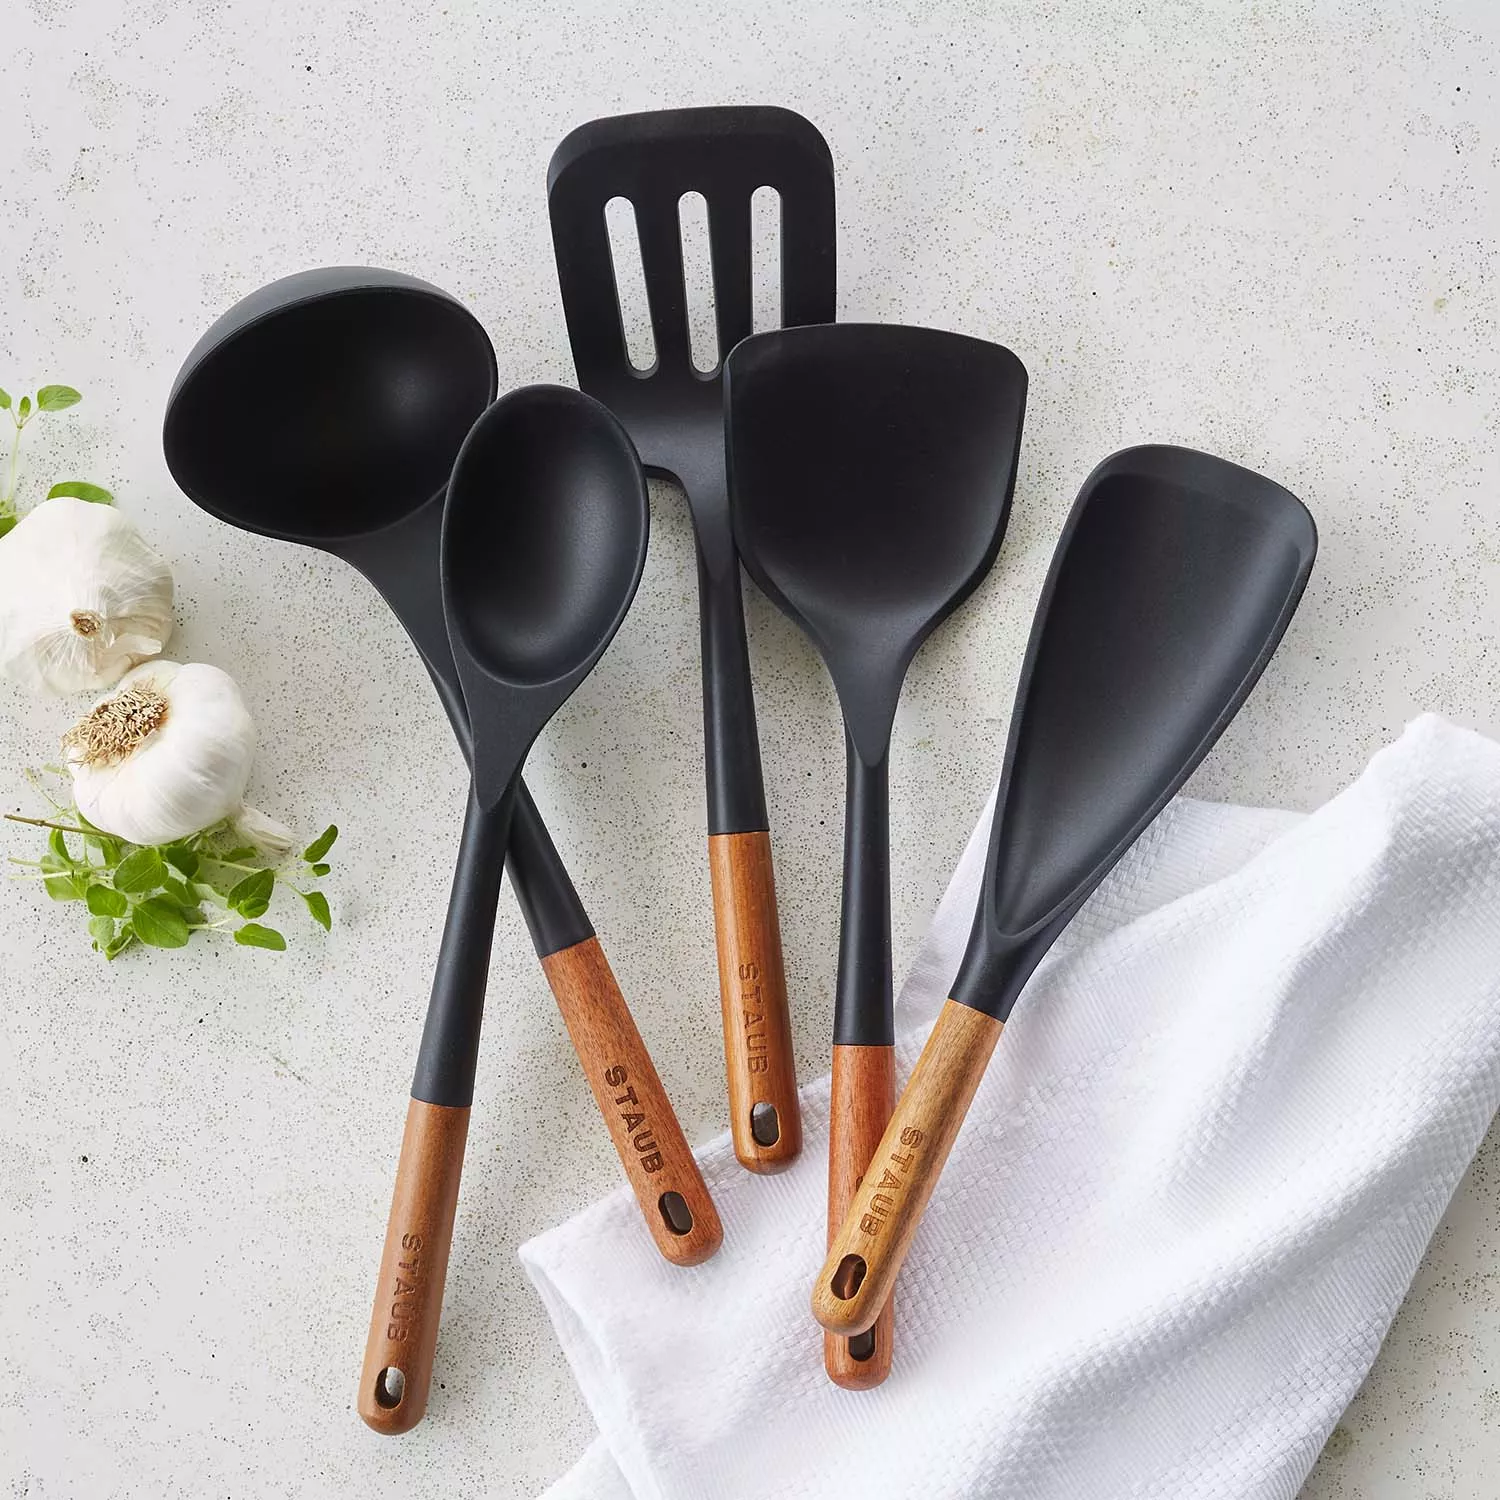 Staub Multifunction Spatula Spoon, Great for Both Cooking and Serving Durable BPA-Free Matte Black Silicone, Acacia Wood Handles, Safe for Nonstick